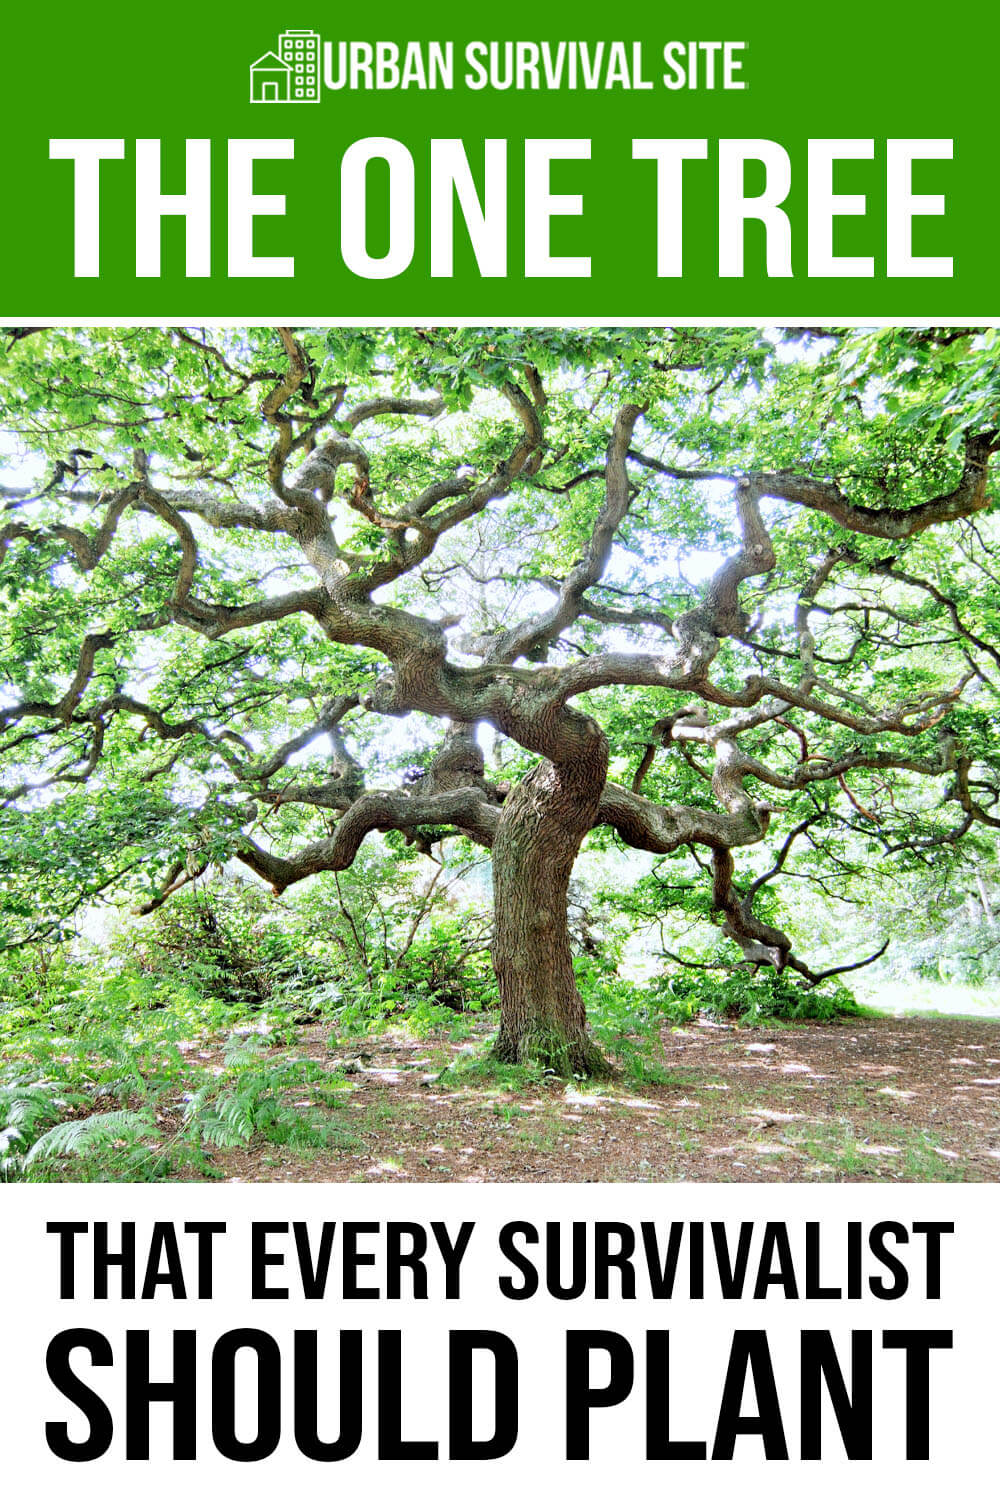 The One Tree That Every Survivalist Should Plant